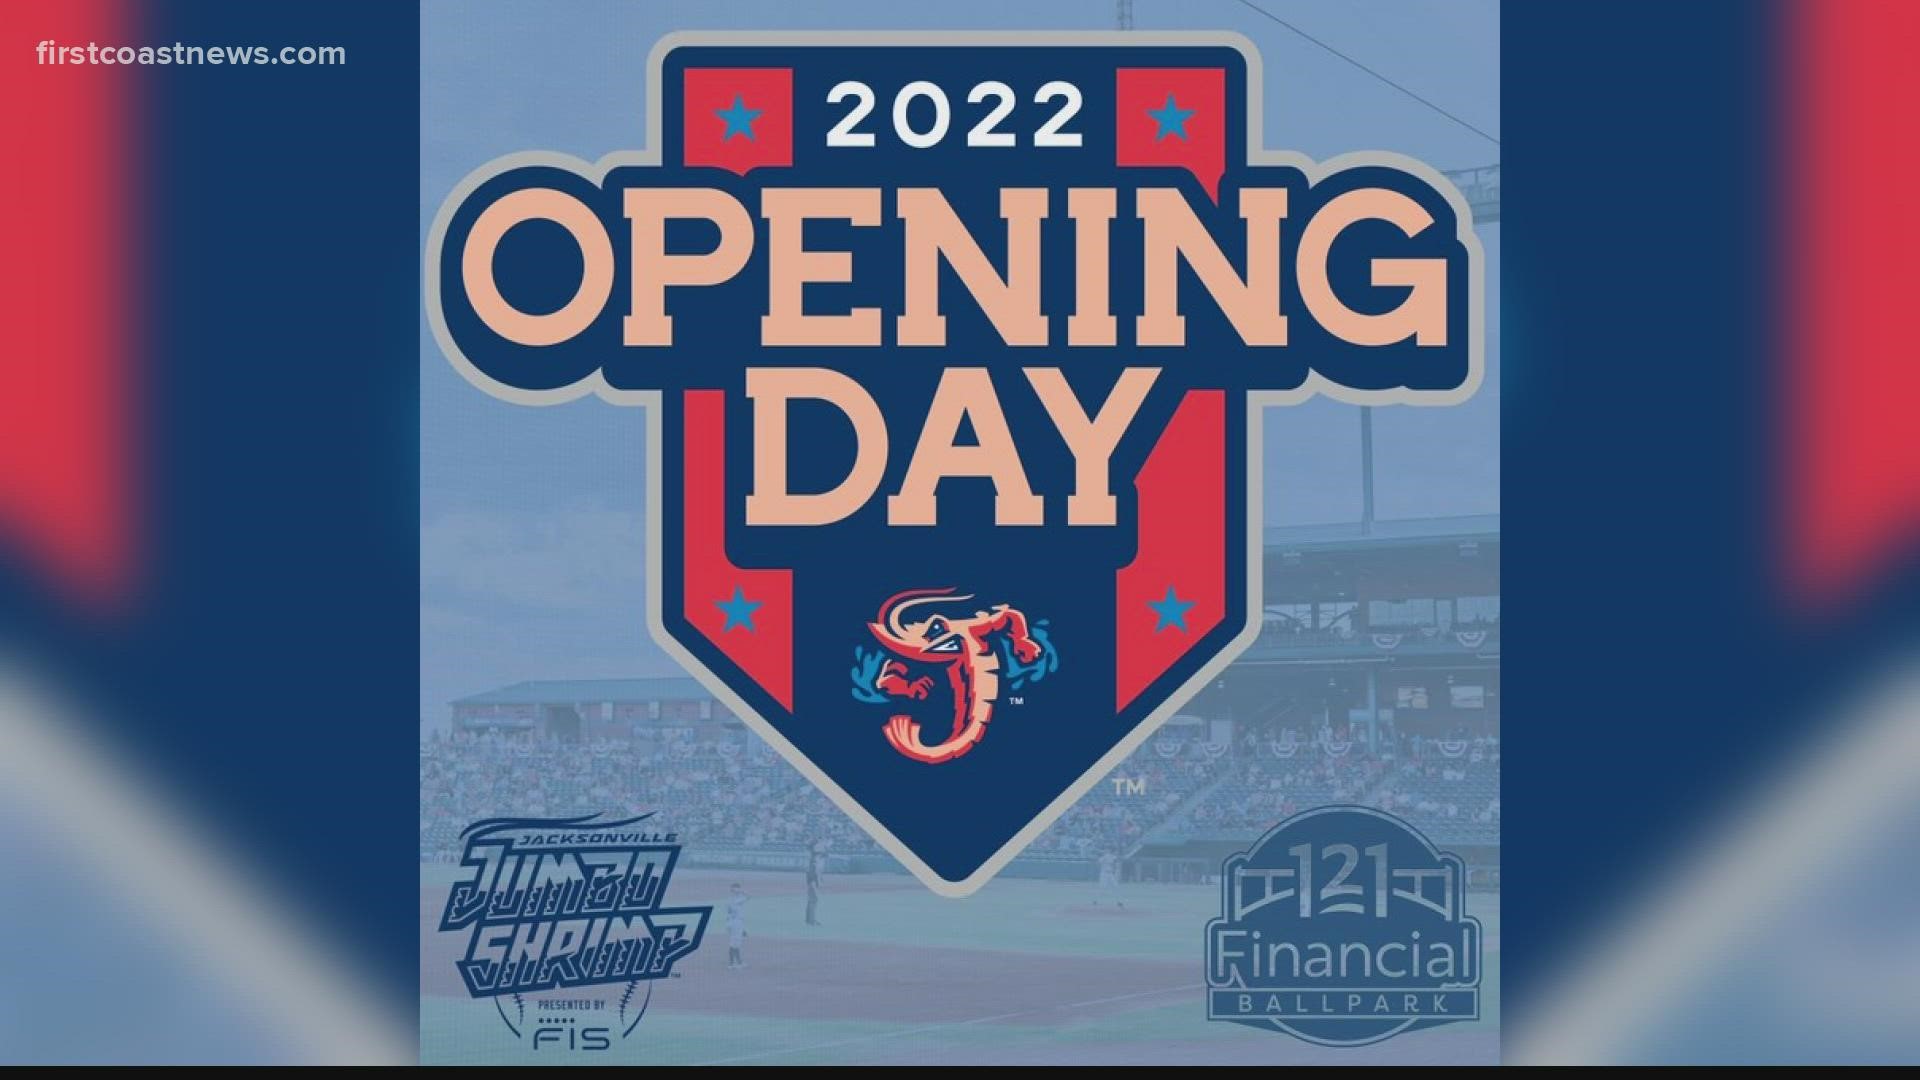 The Jumbo Shrimp tweeted an image saying "Opening Day," with the caption "04.05.22."